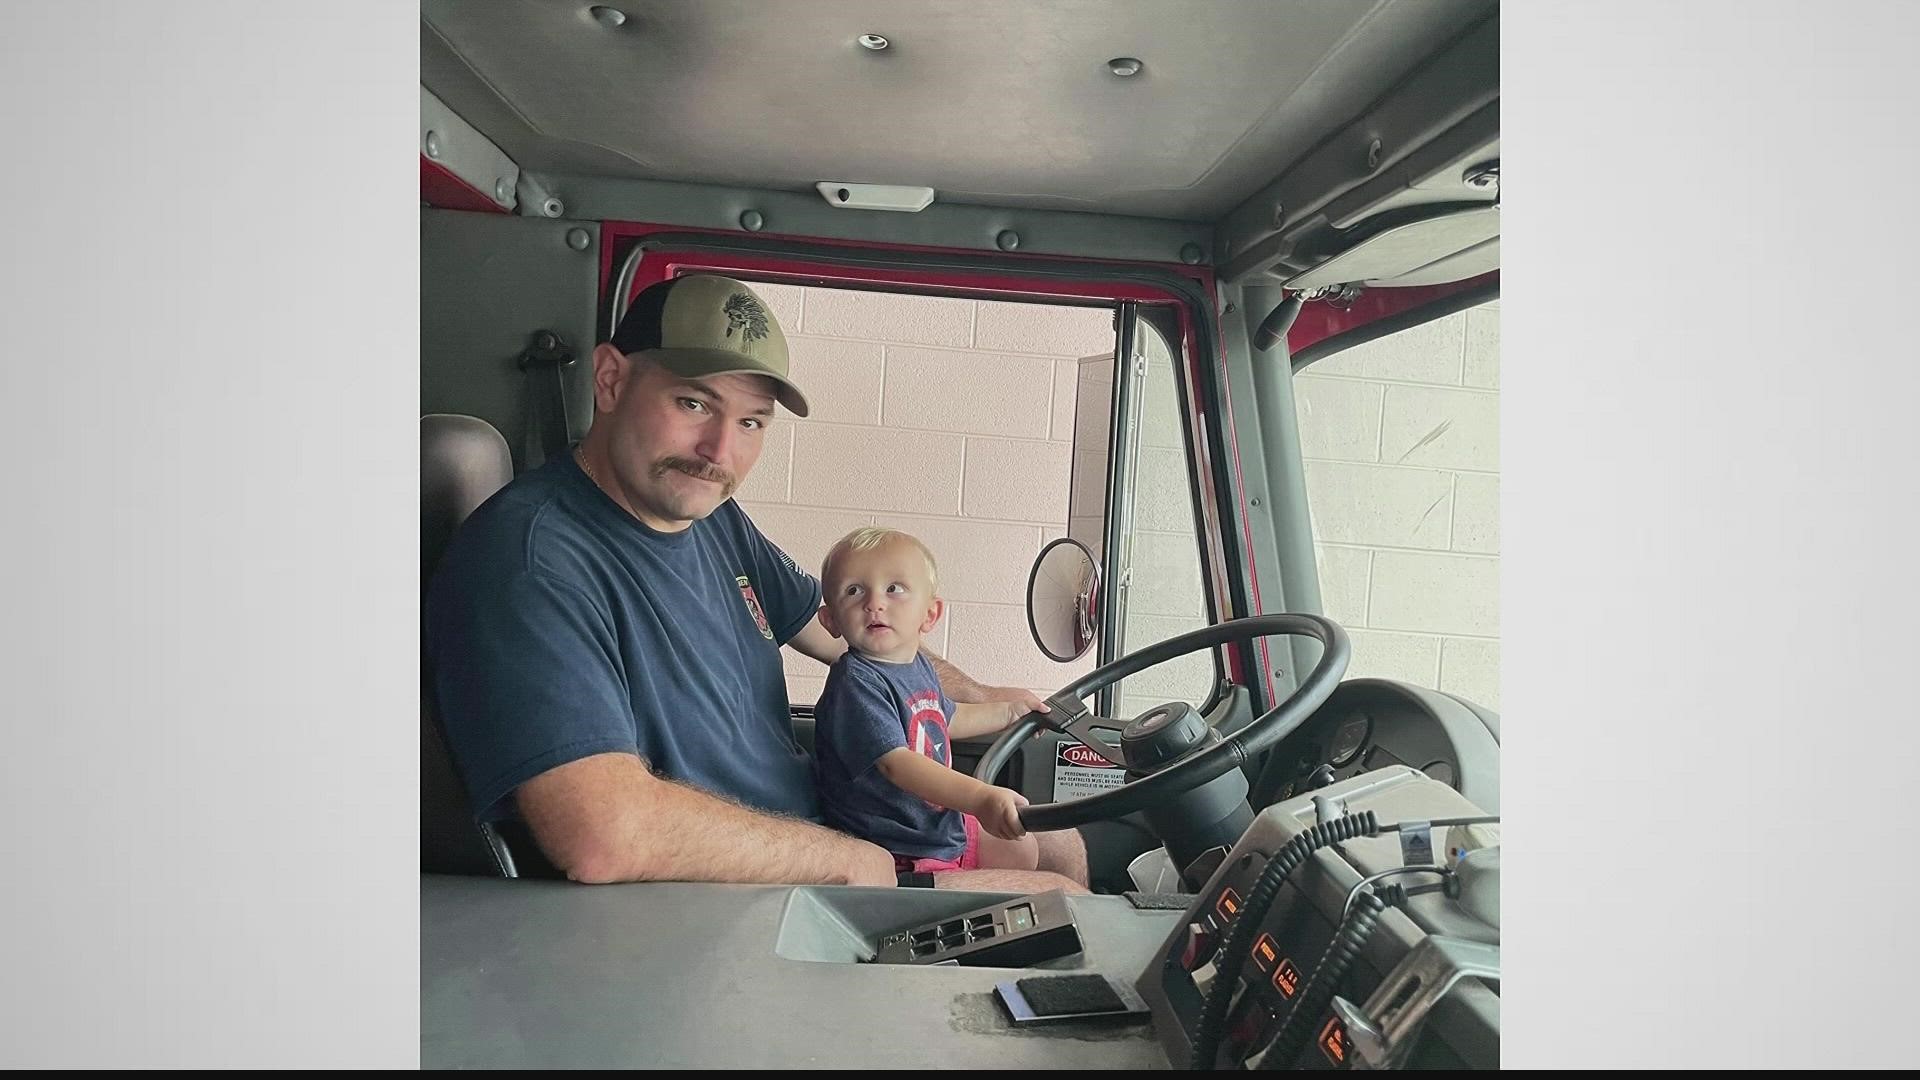 The fire department in Polk County is holding a fundraiser for the Ingram family Sunday, July 24 at the Kroger in Cedartown.